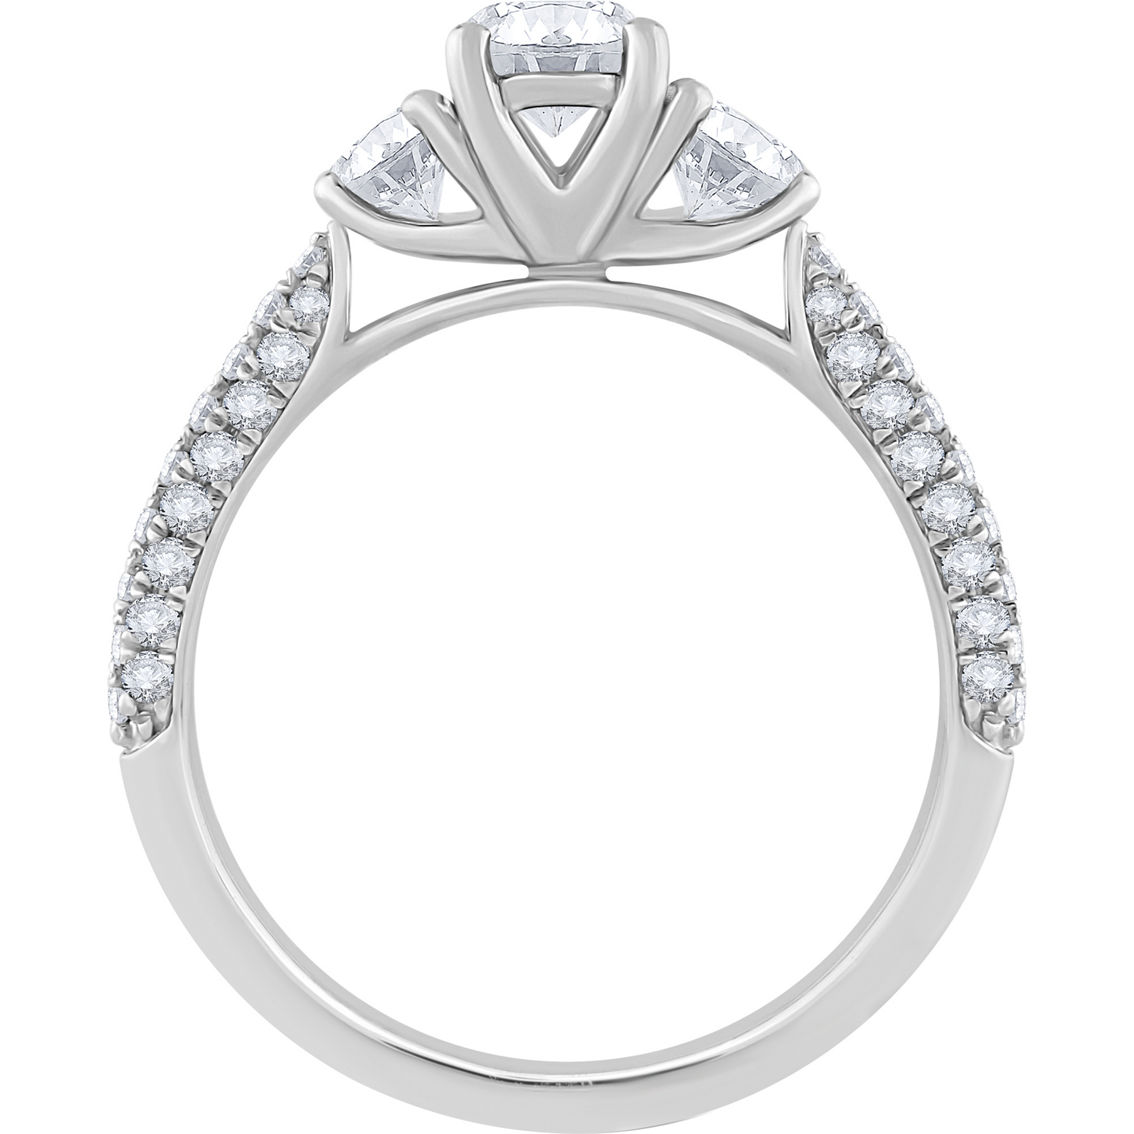 From the Heart 1 1/2 CTW Lab Grown Diamond Engagement Ring with Center Oval Cut - Image 2 of 2